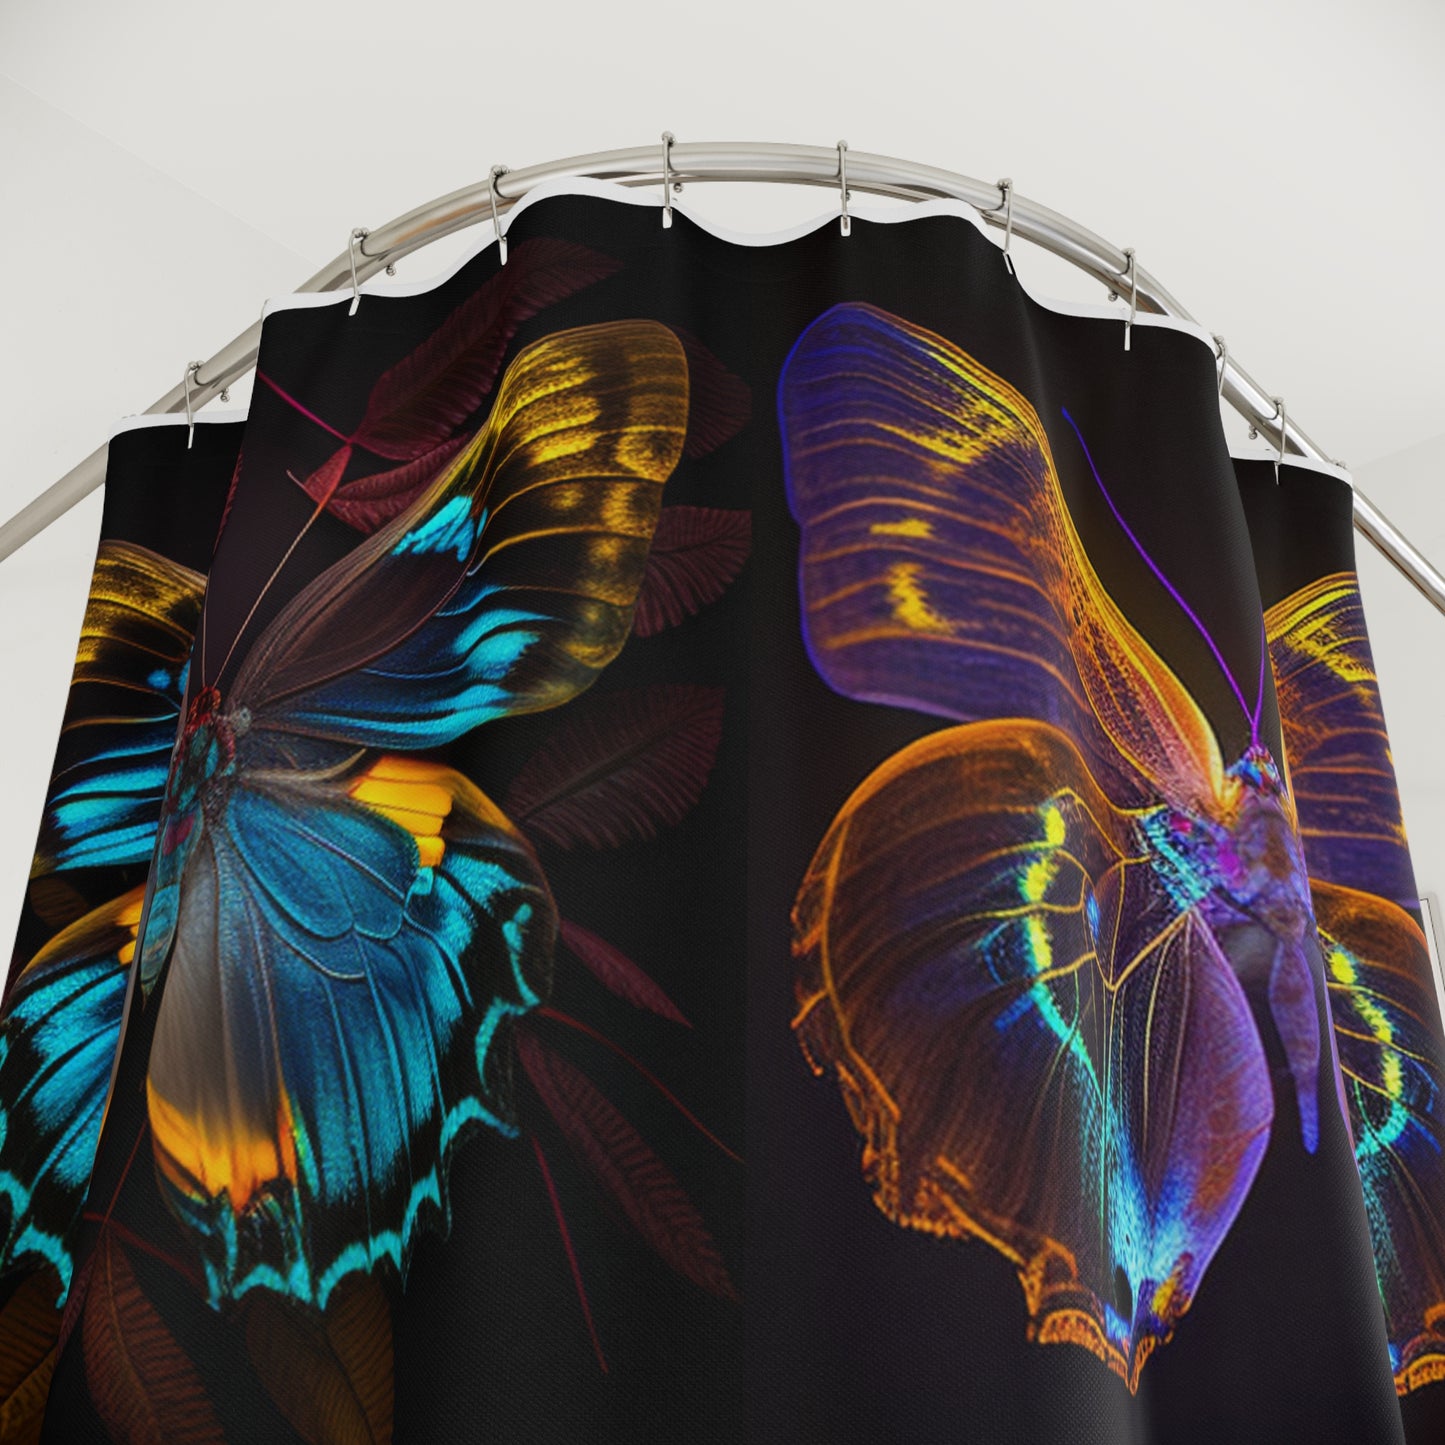 Polyester Shower Curtain Neon Butterfly Flair 5